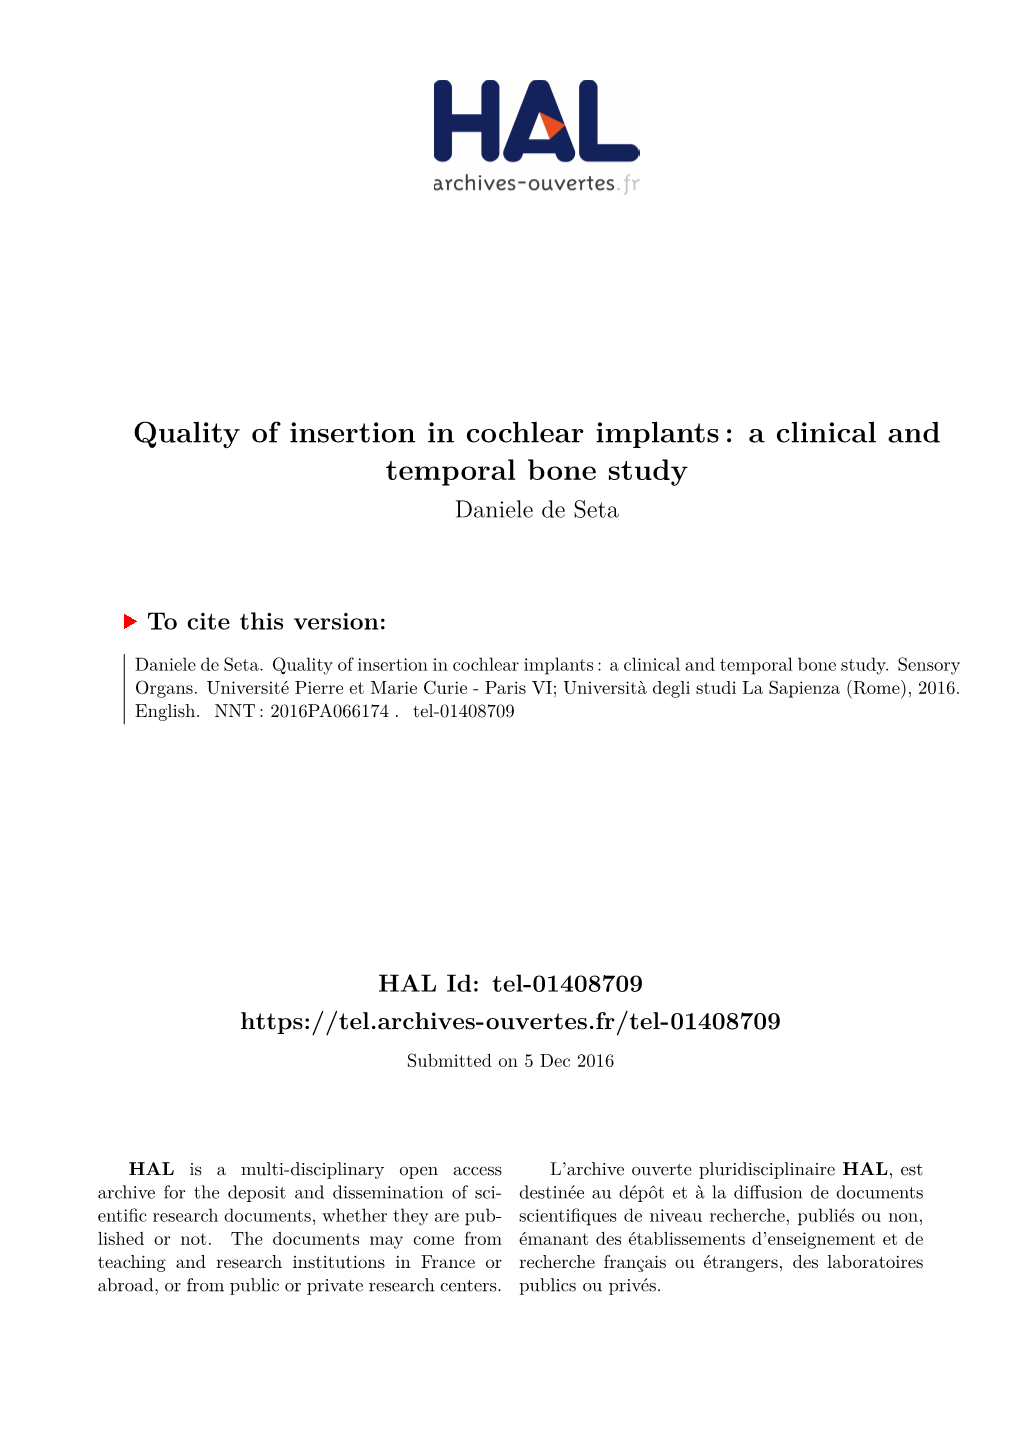 Quality of Insertion in Cochlear Implants: a Clinical and Temporal Bone Study